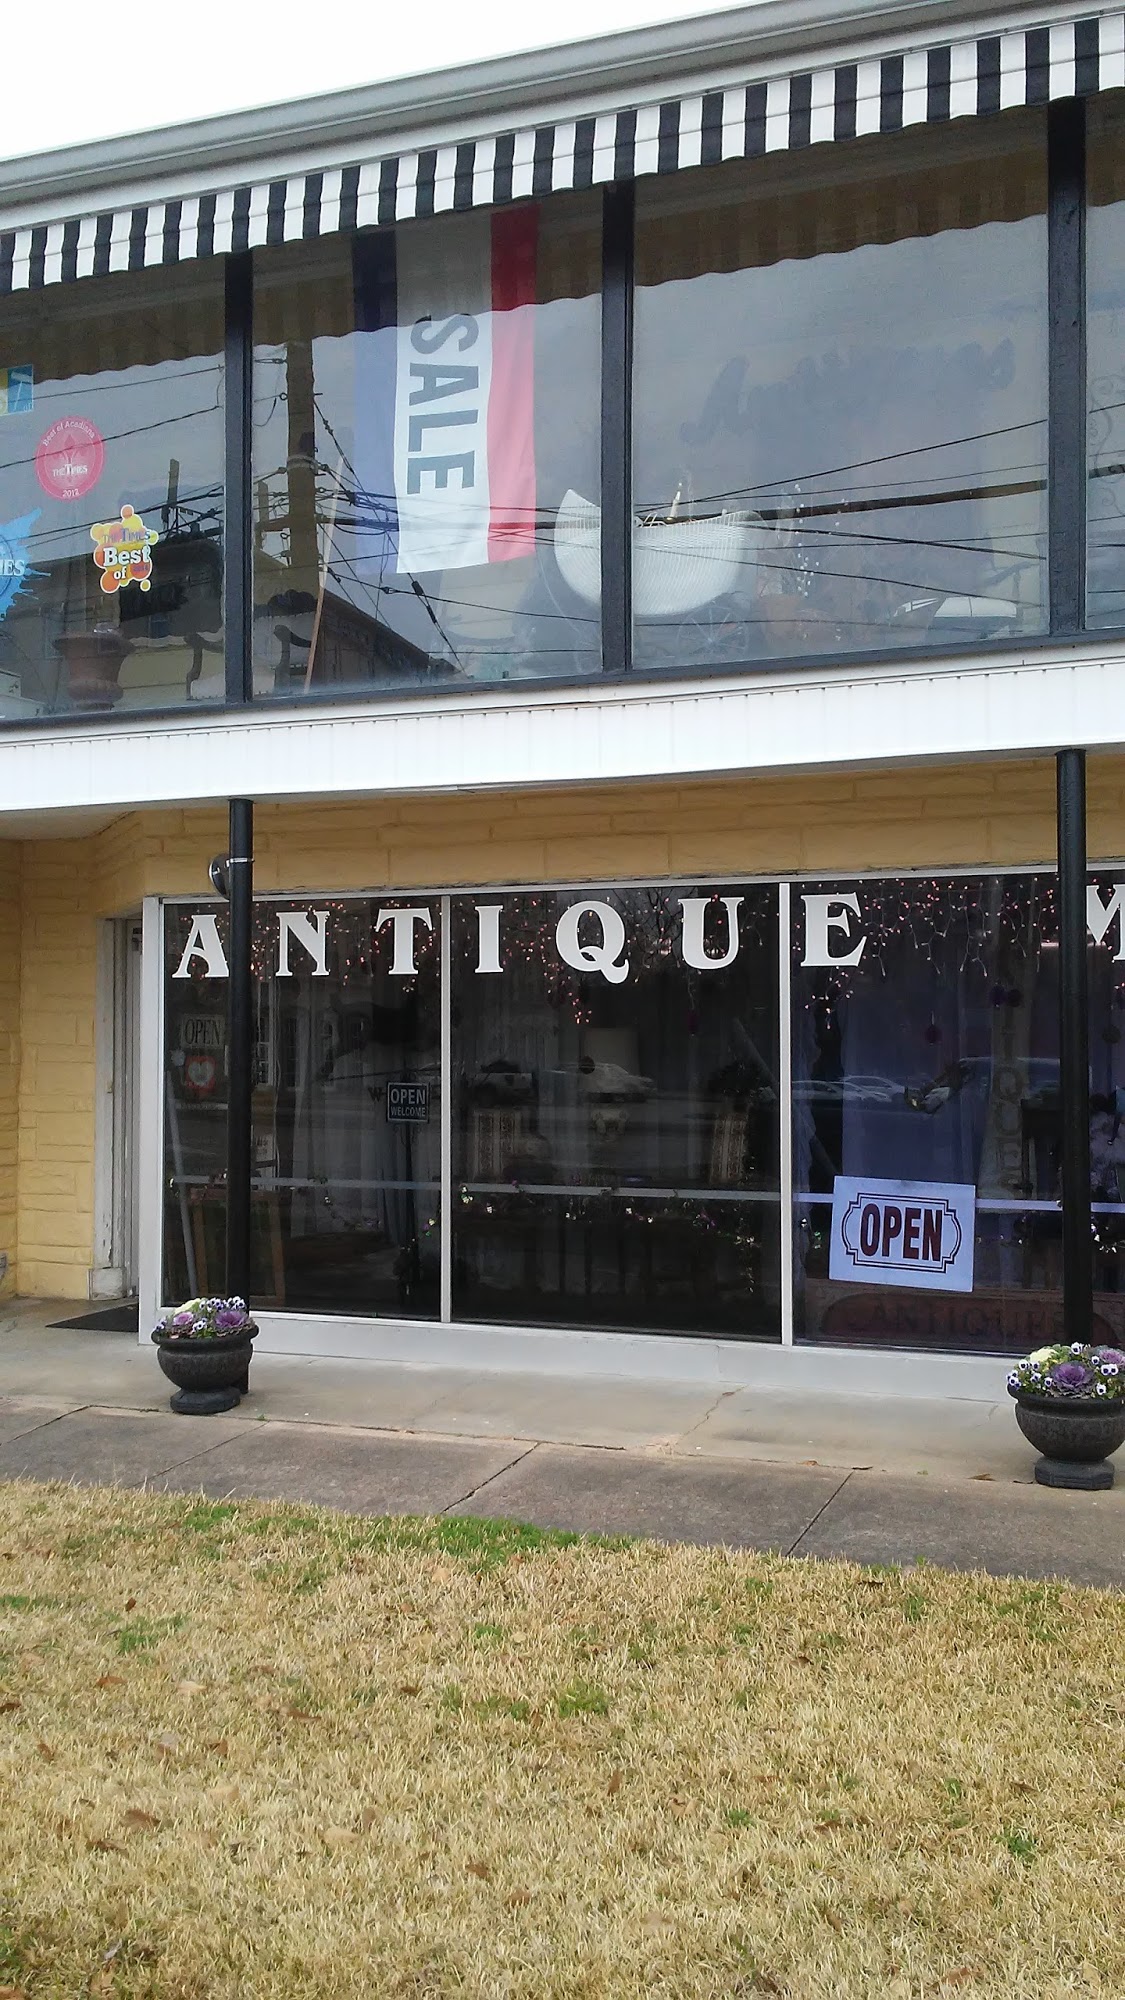 Reflections of Olde Antique Mall